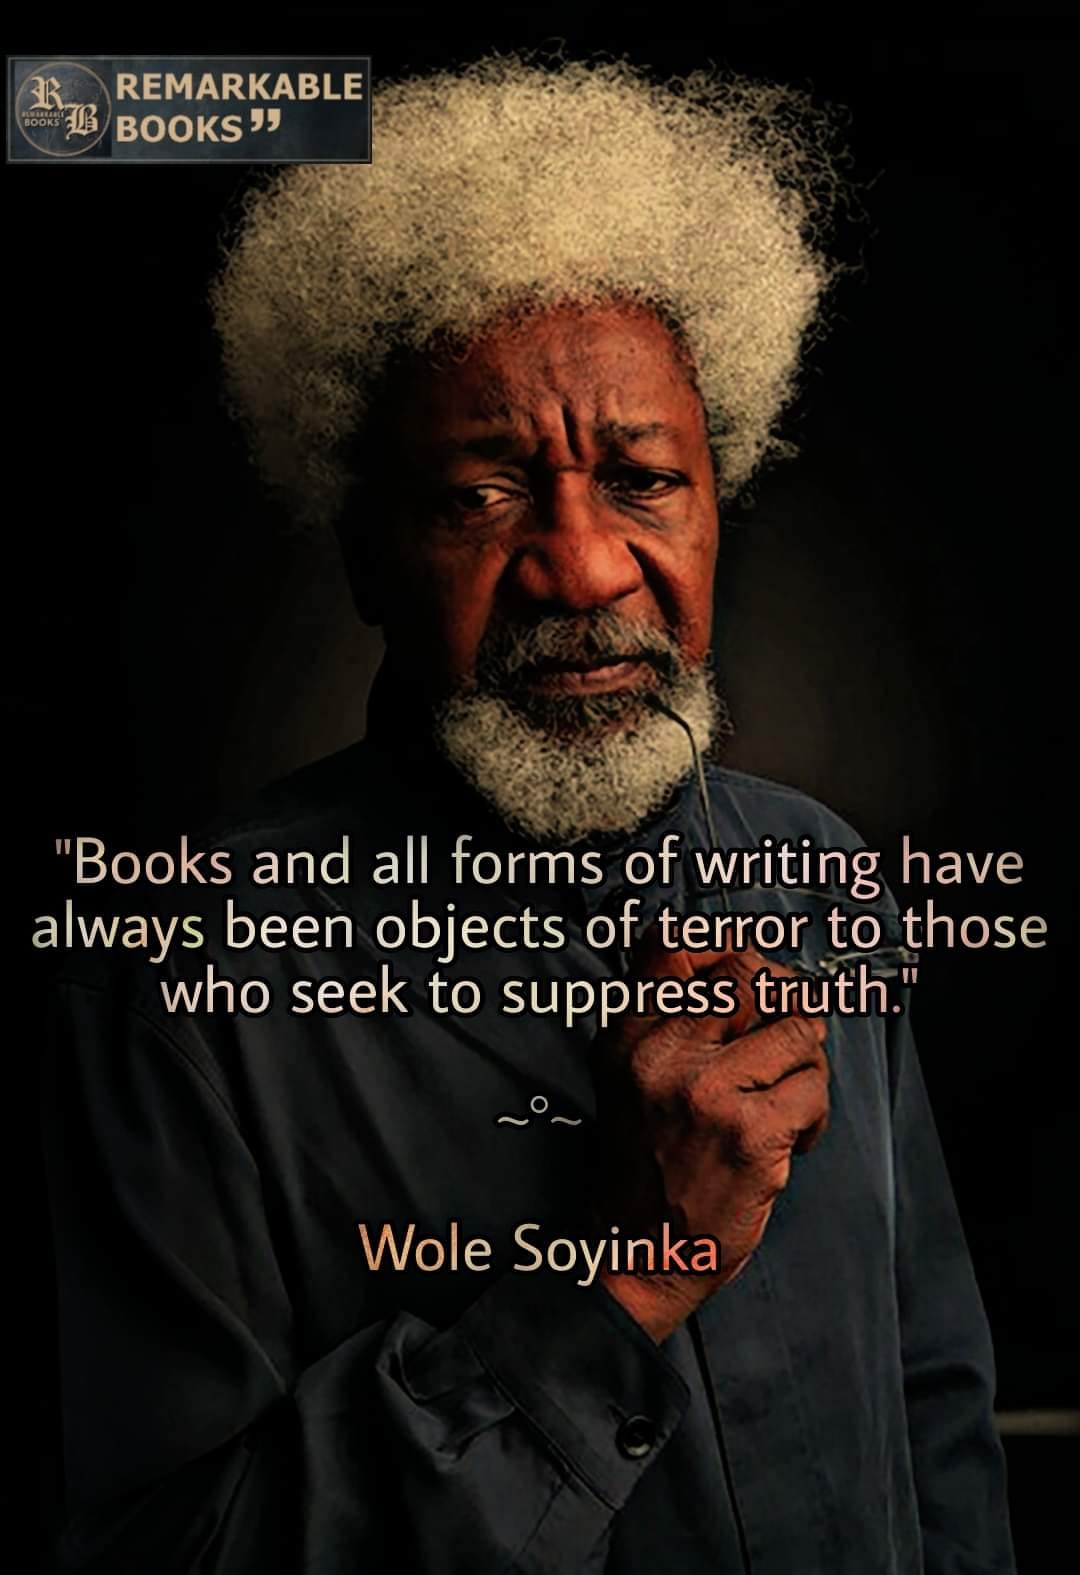 Books and all forms of writing are terror to those who wish to suppress the truth.